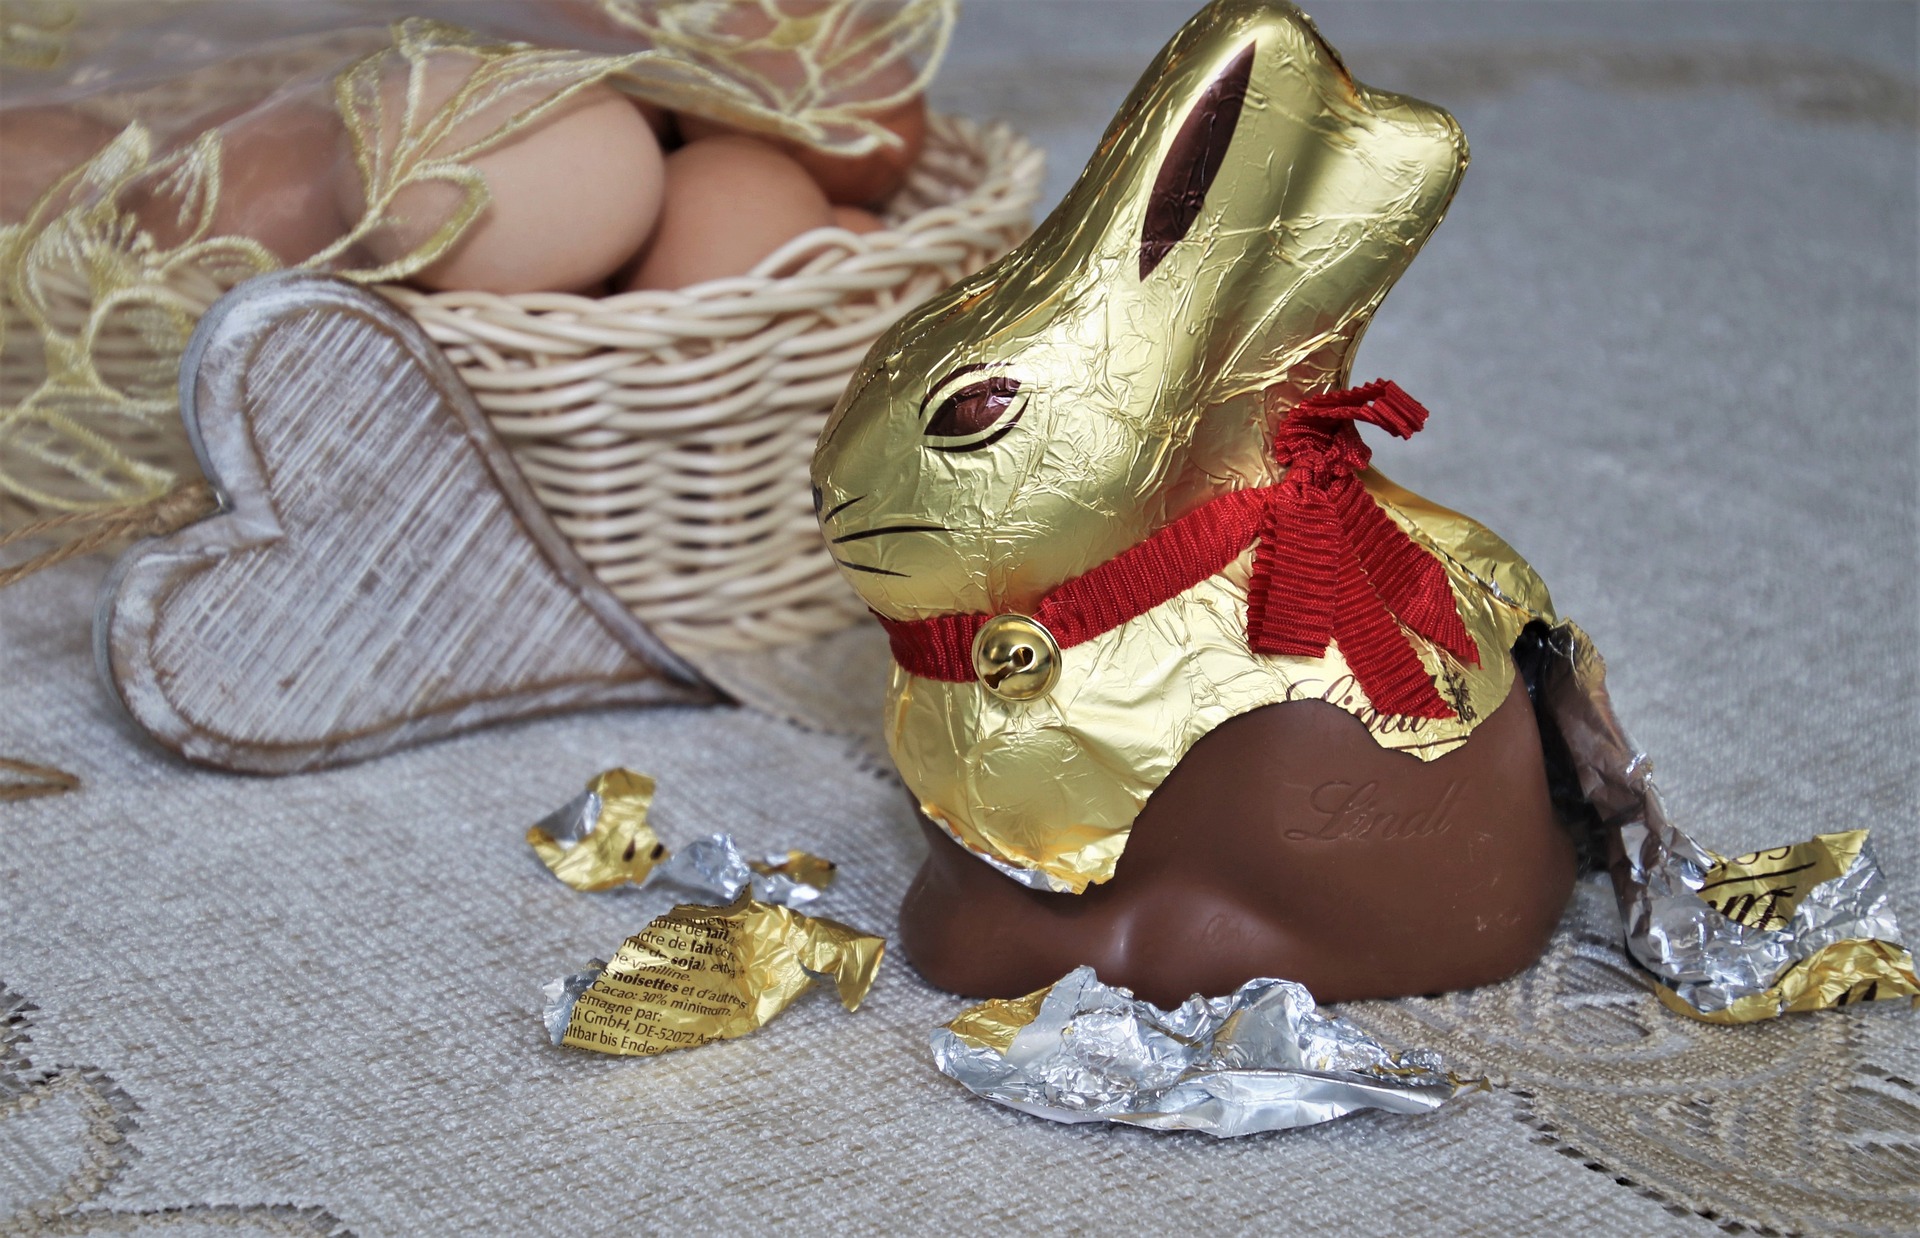 chocolate bunny with foil packaging half ripped off.